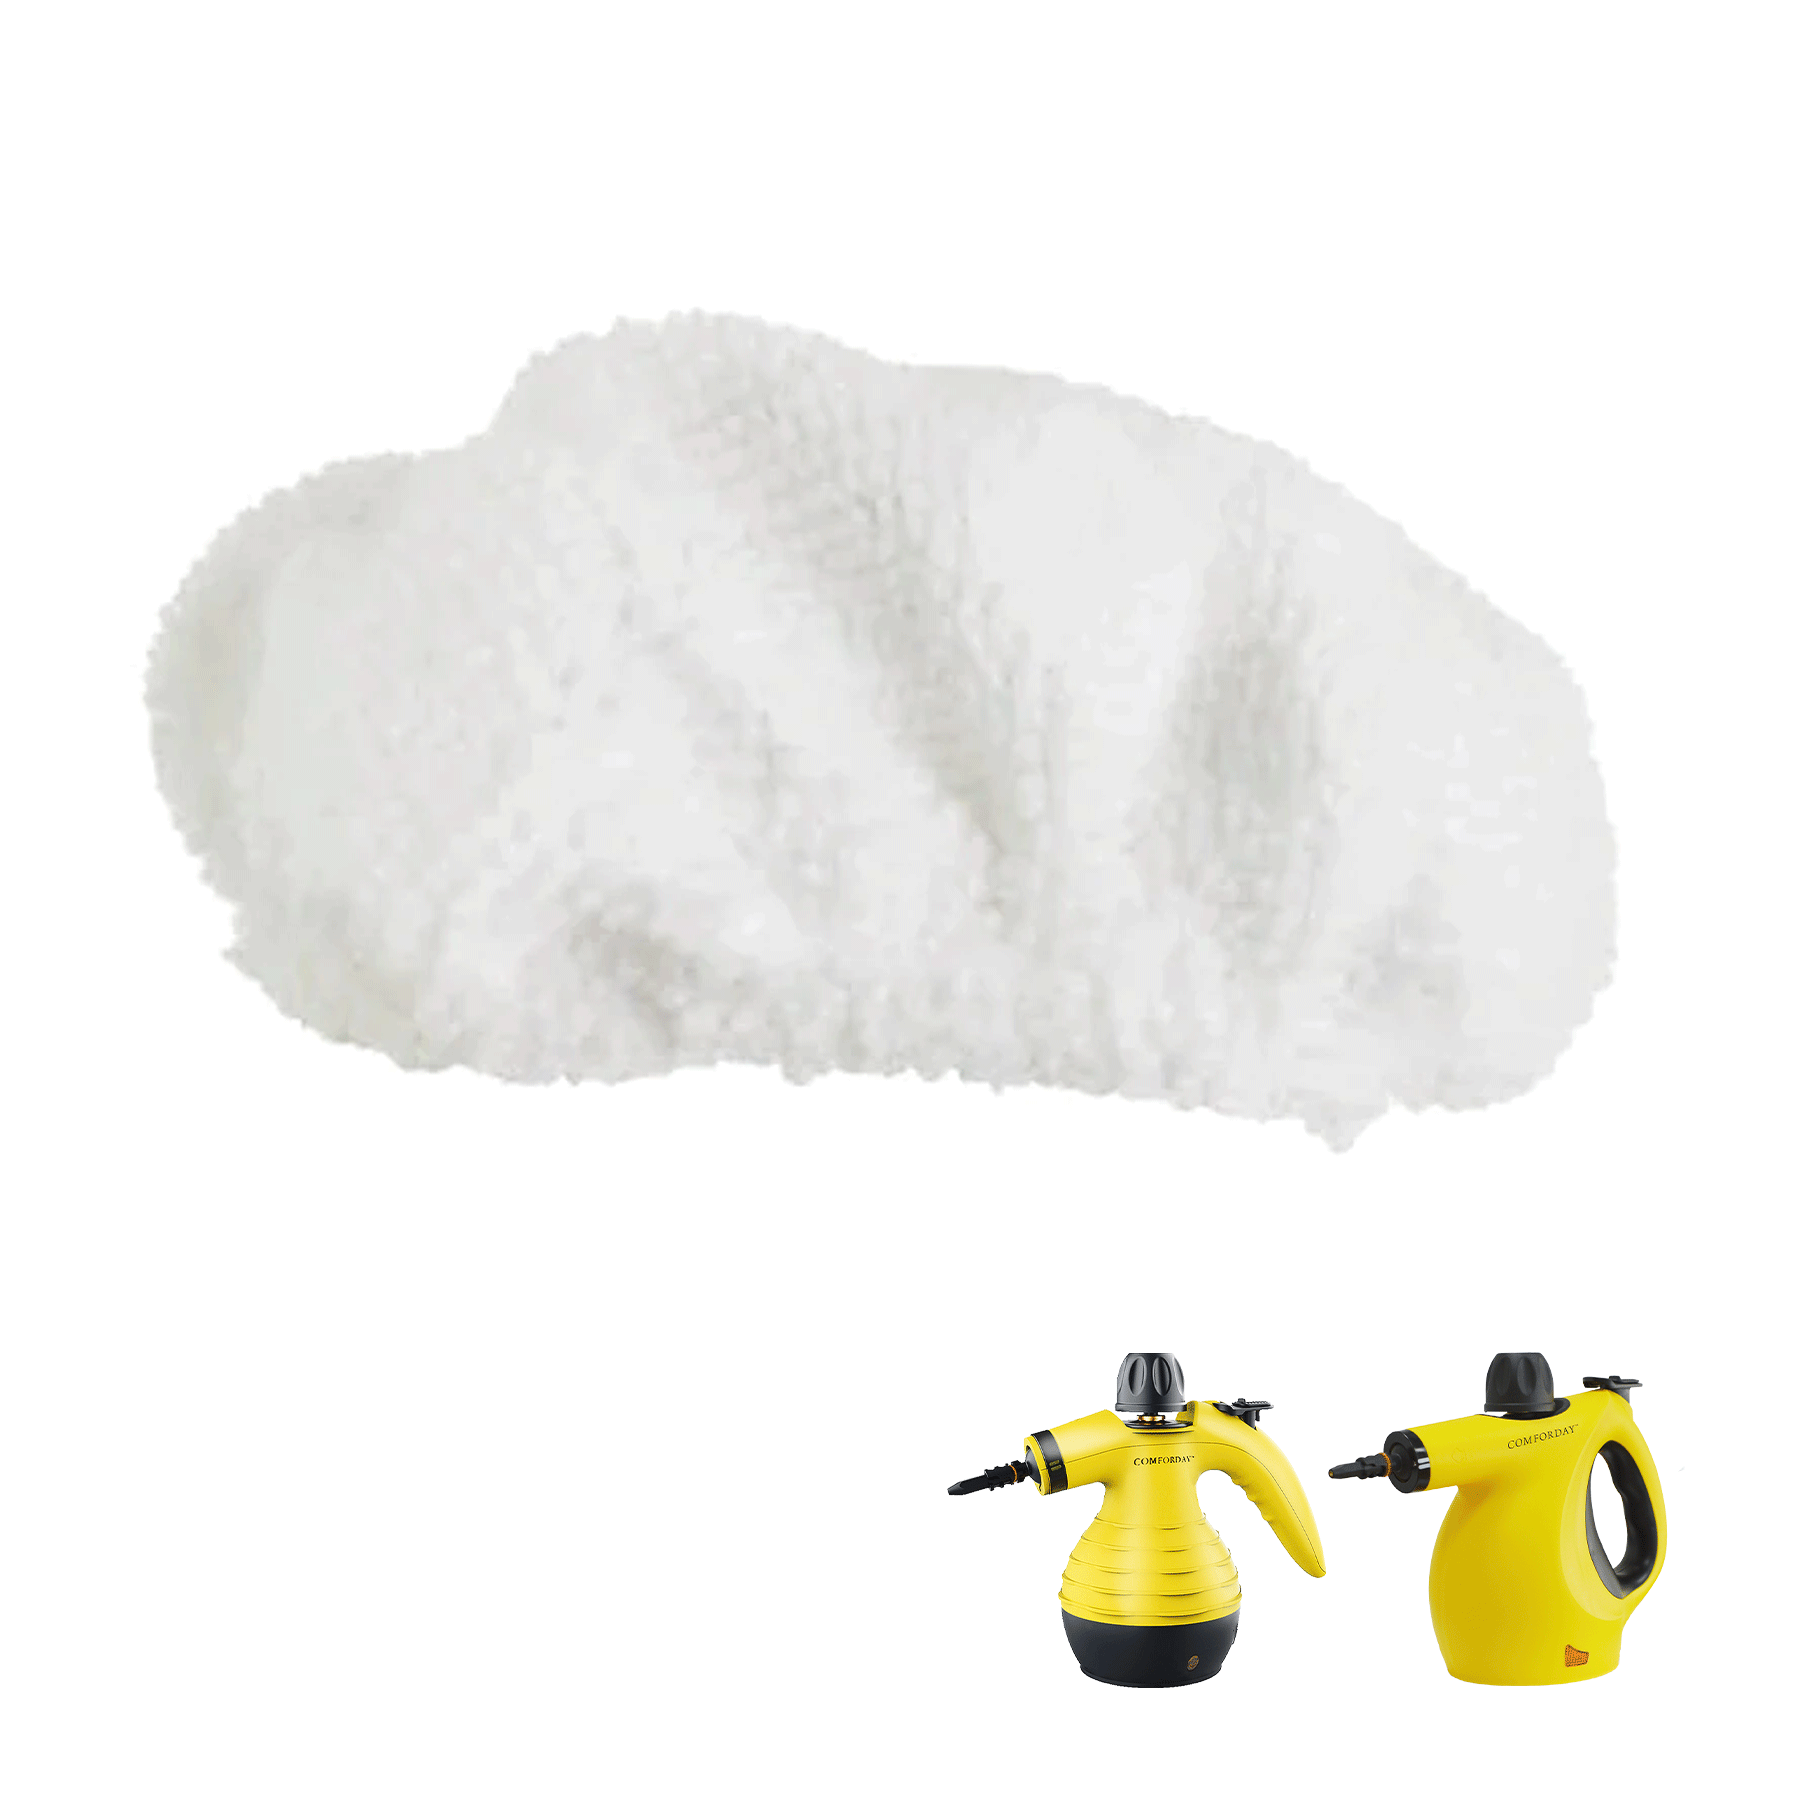 Towel sleeve for Steam Cleaner tool (3 Units) for Handheld Steam Cleaner